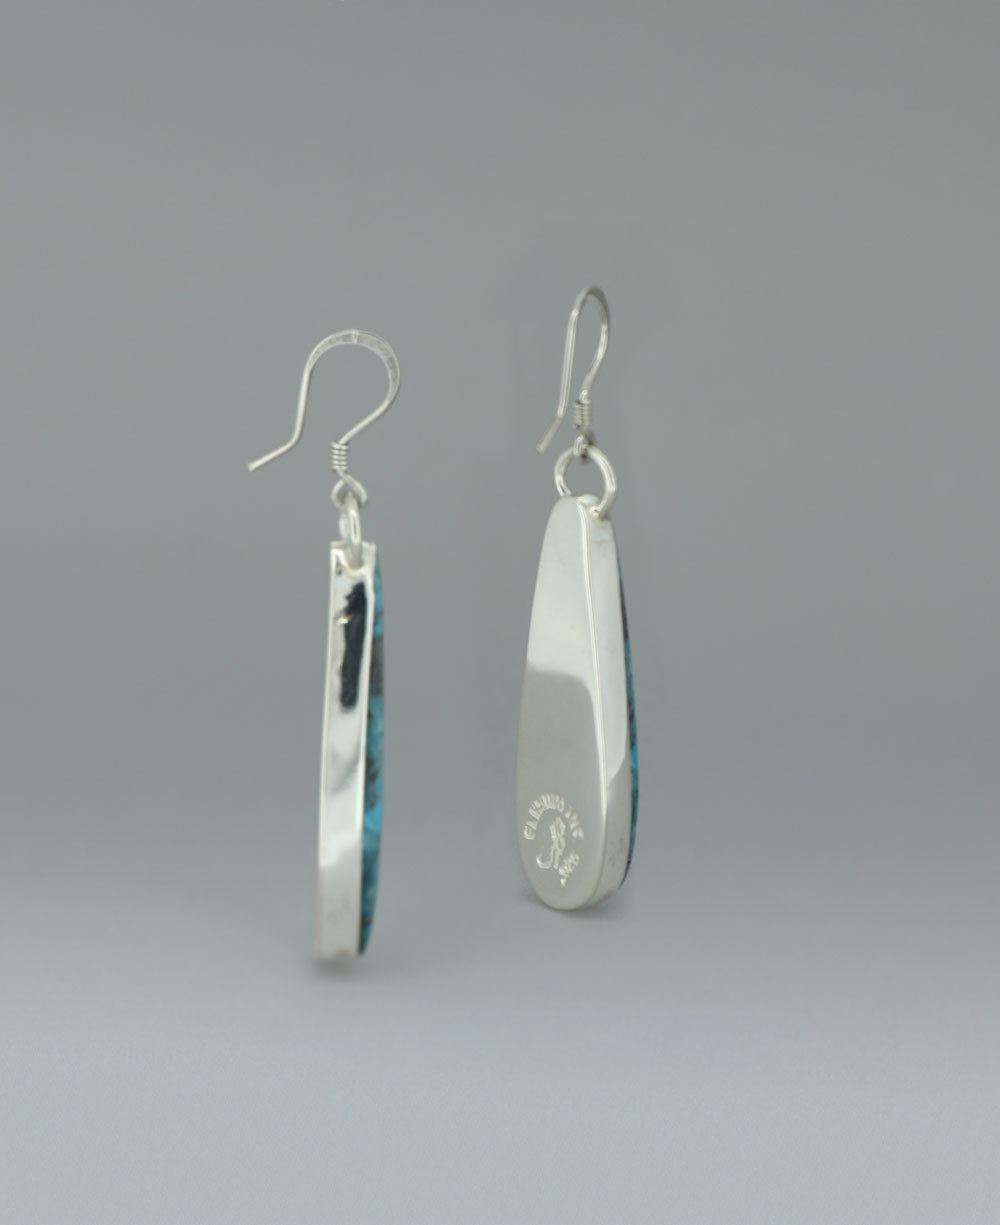 Close-up image of the sterling silver Genuine Turquoise earrings